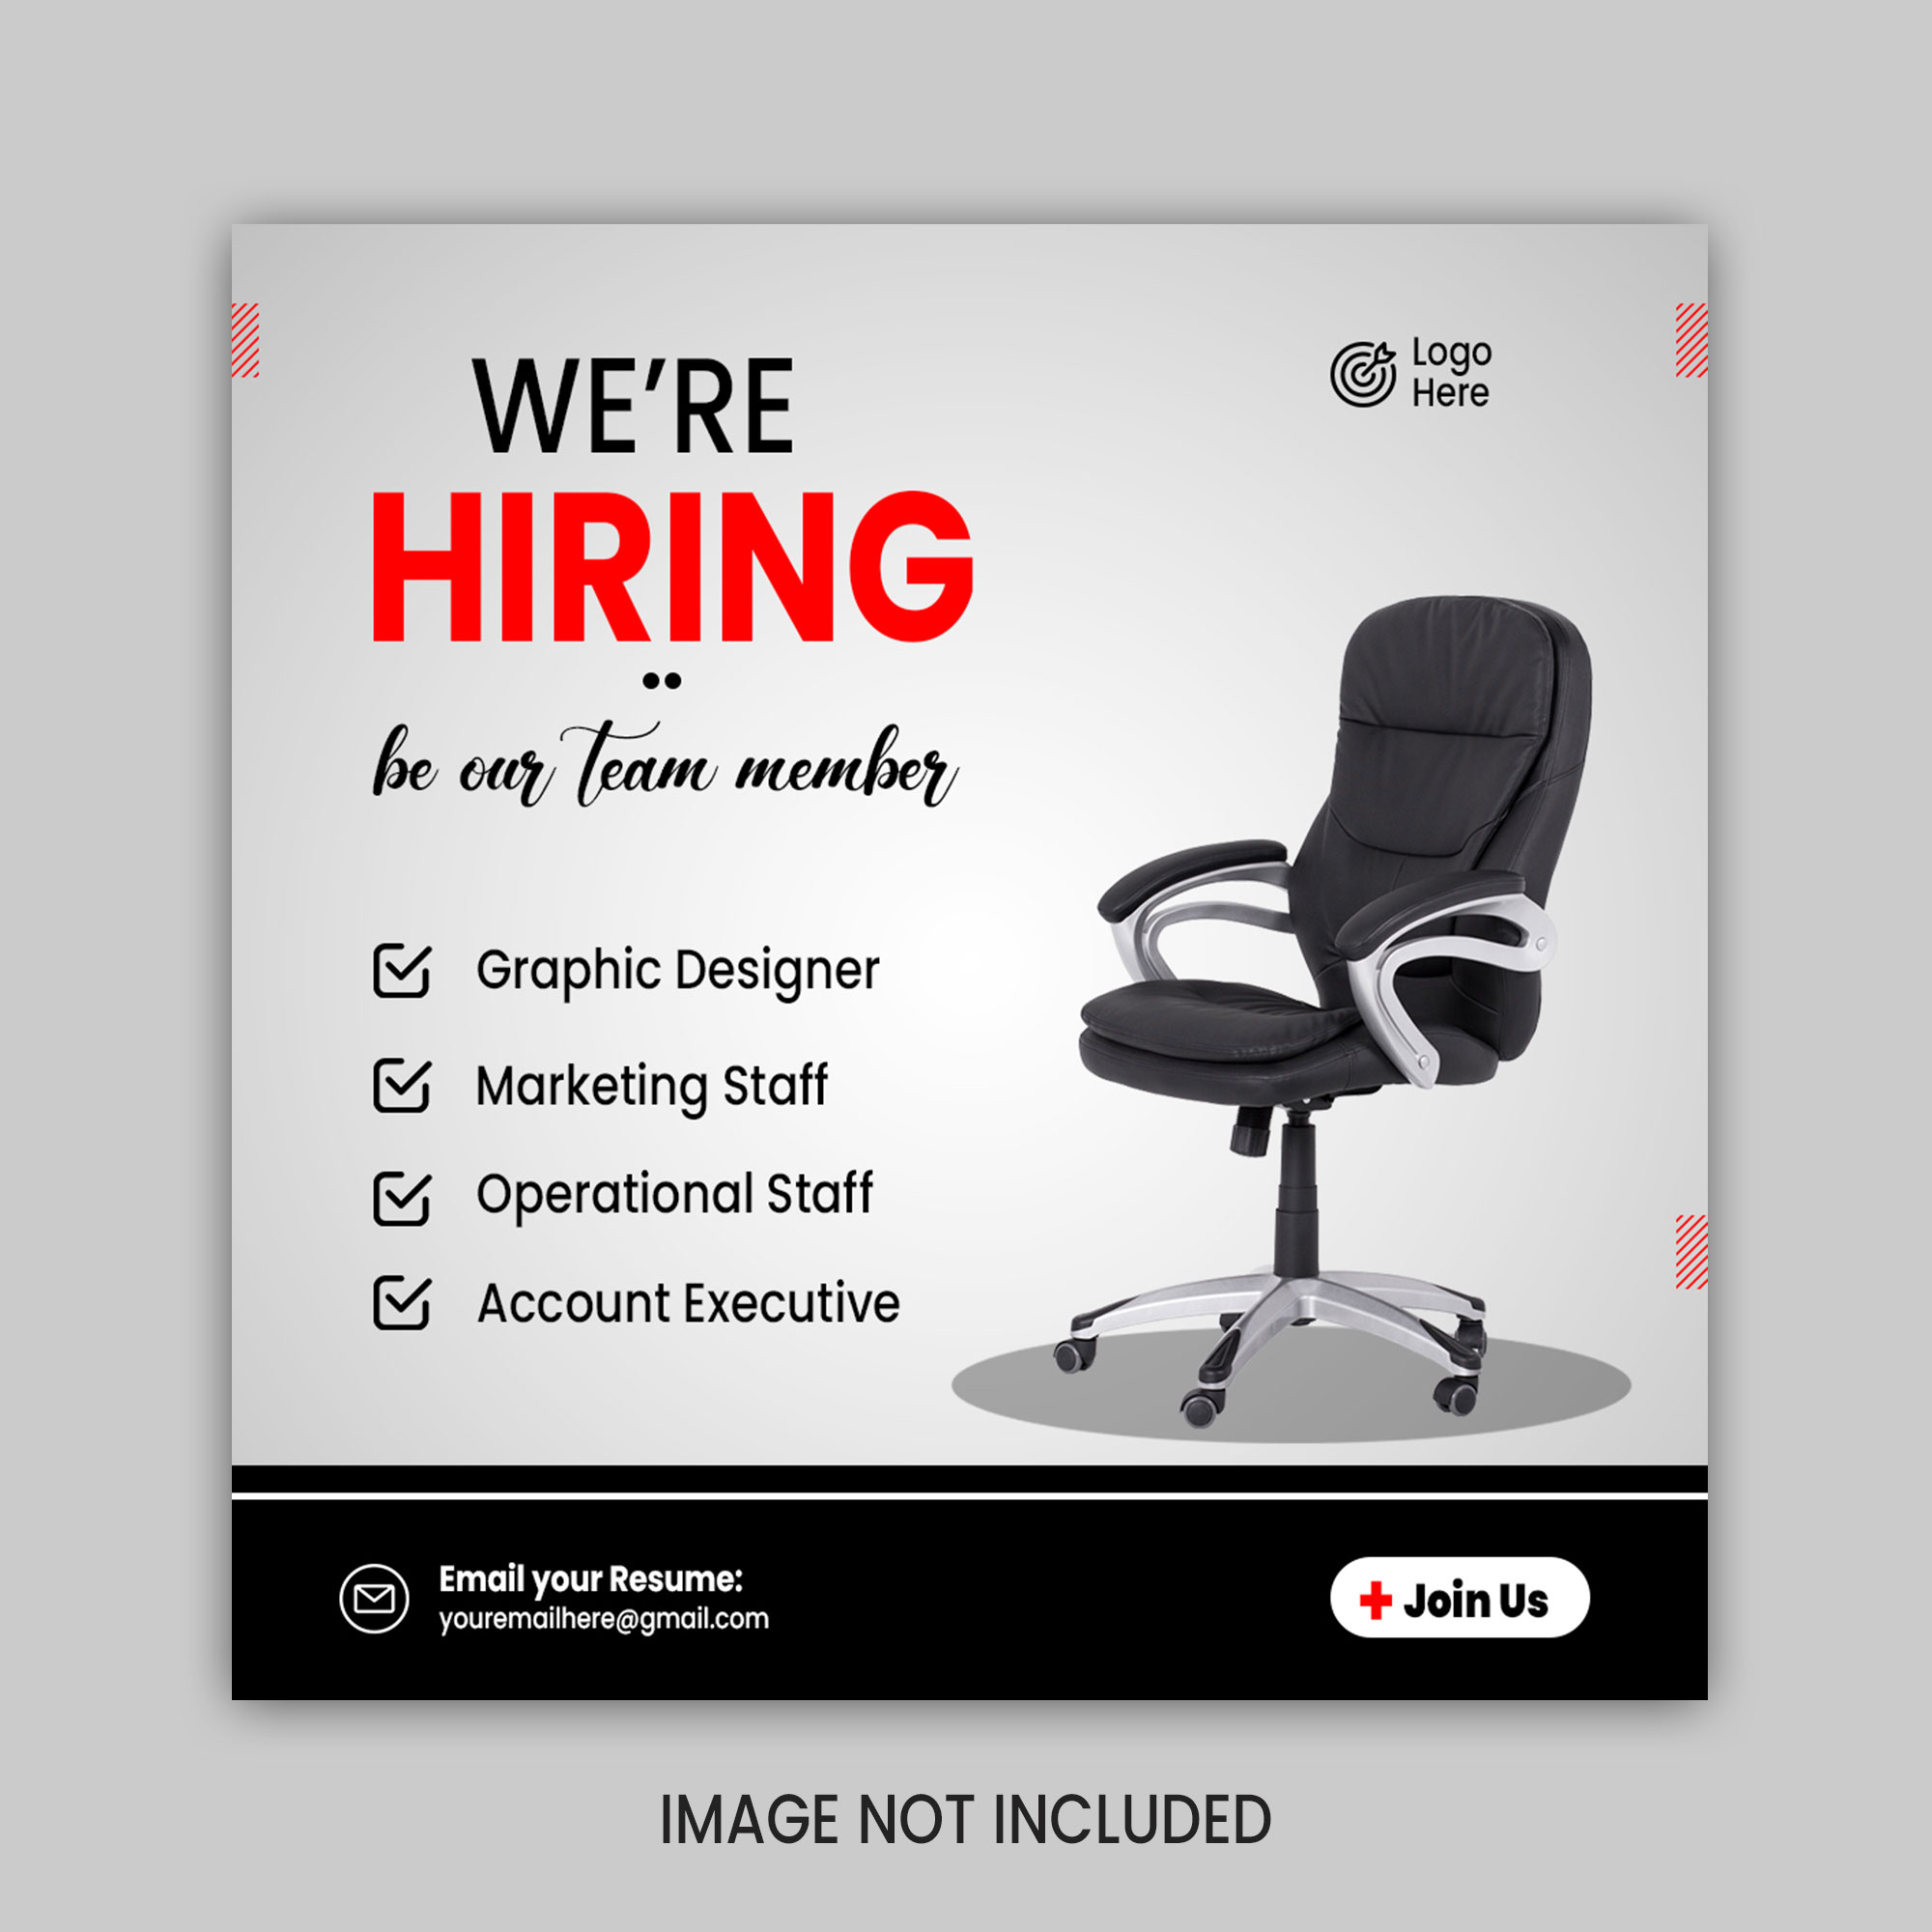 We are hiring poster job vacancy square banner or social media post template cover image.